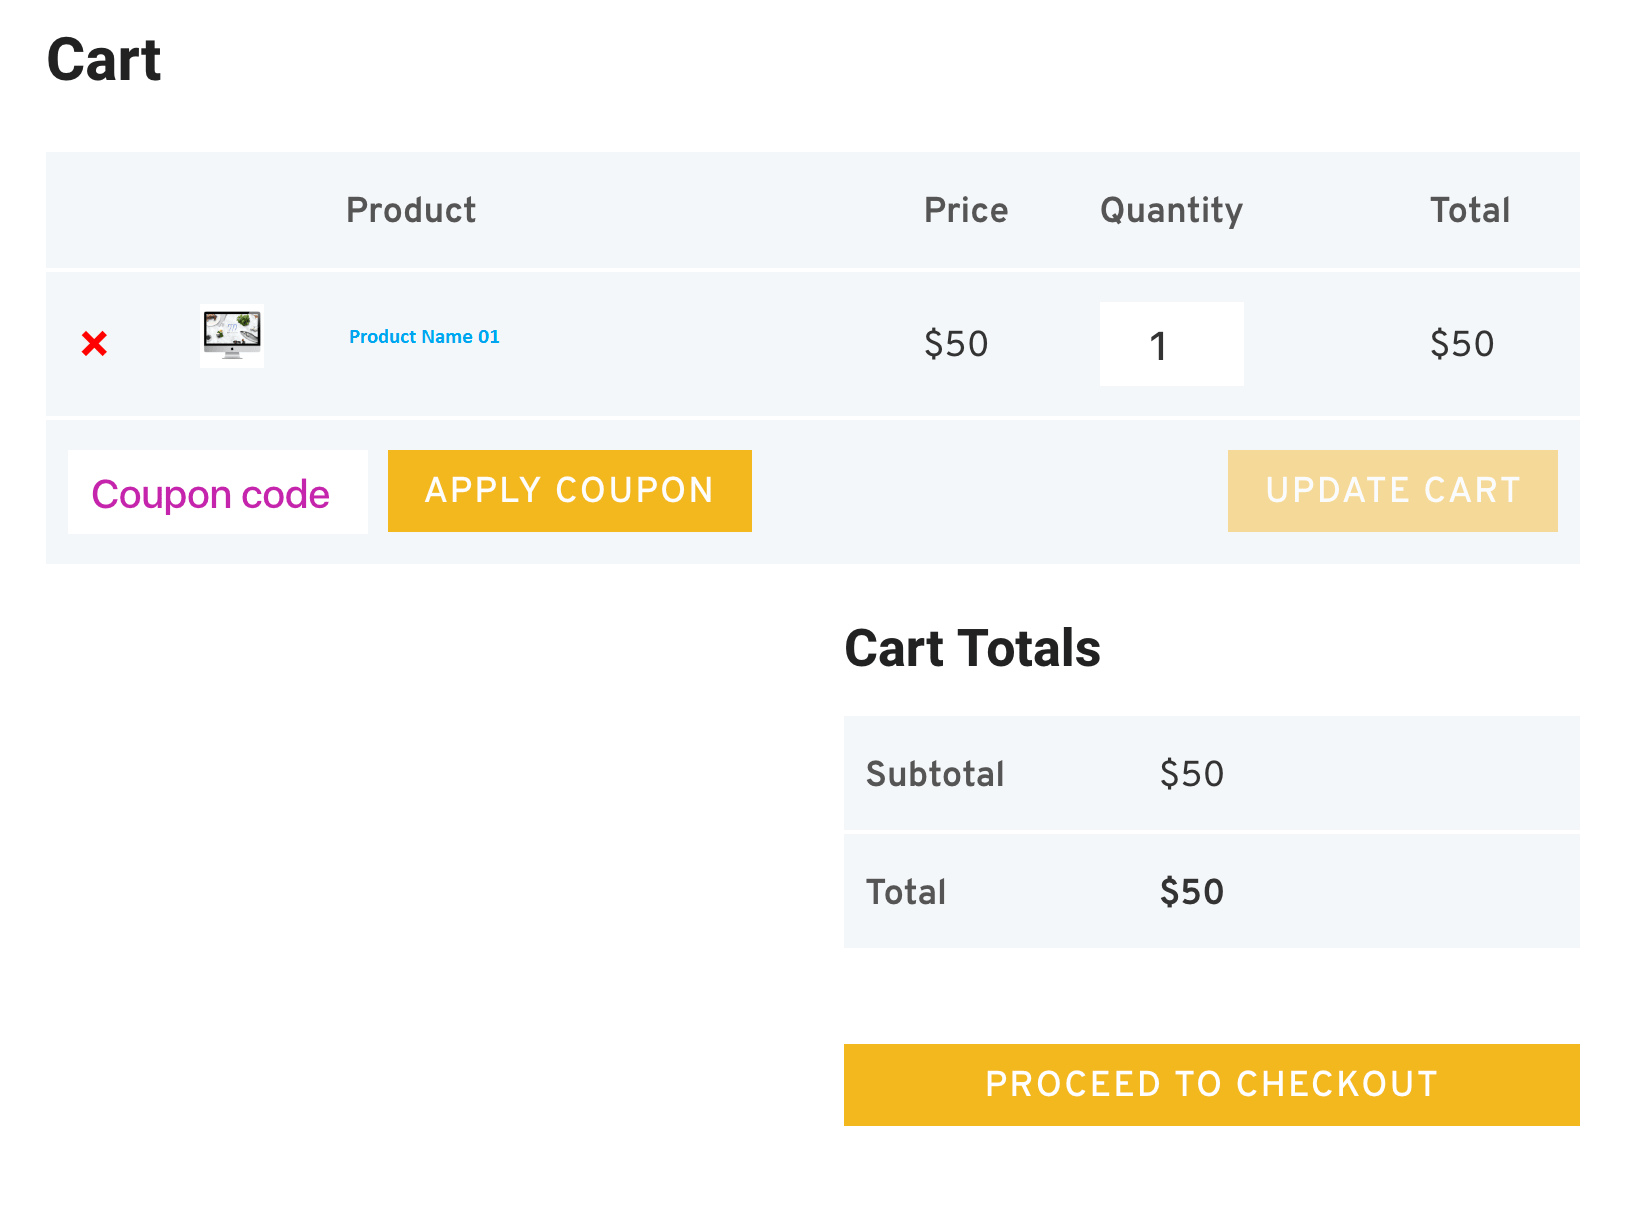 Customize WooCommerce Cart, Checkout, and Account Pages with CSS